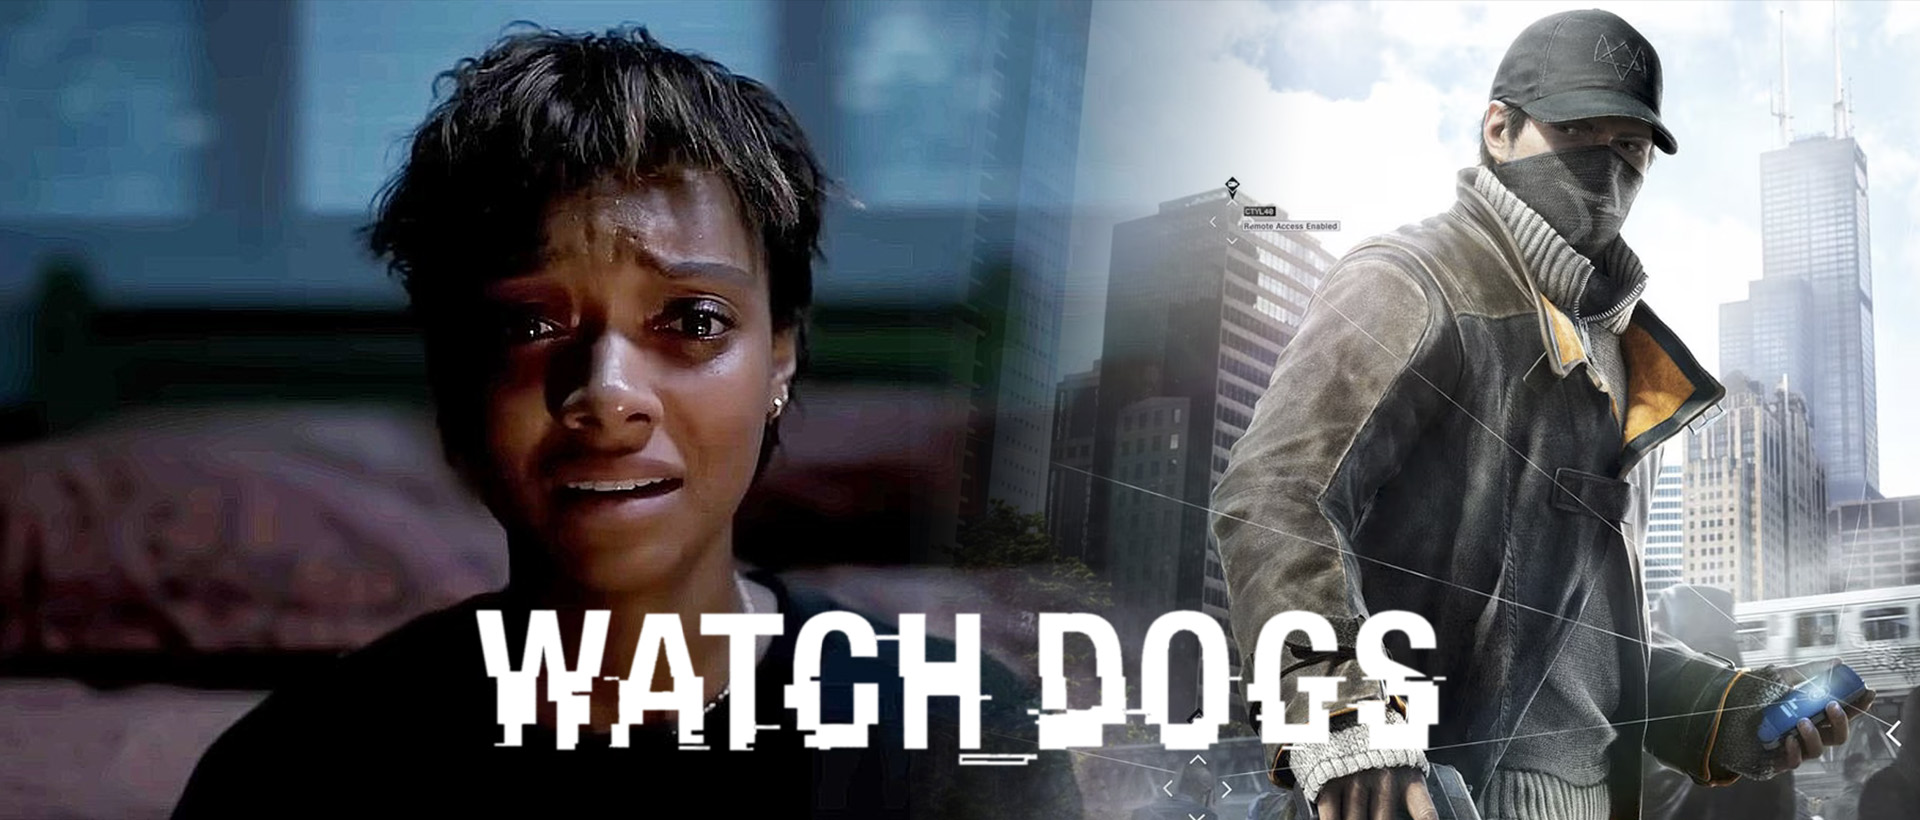 all-you-need-to-know-about-watch-dogs-movie